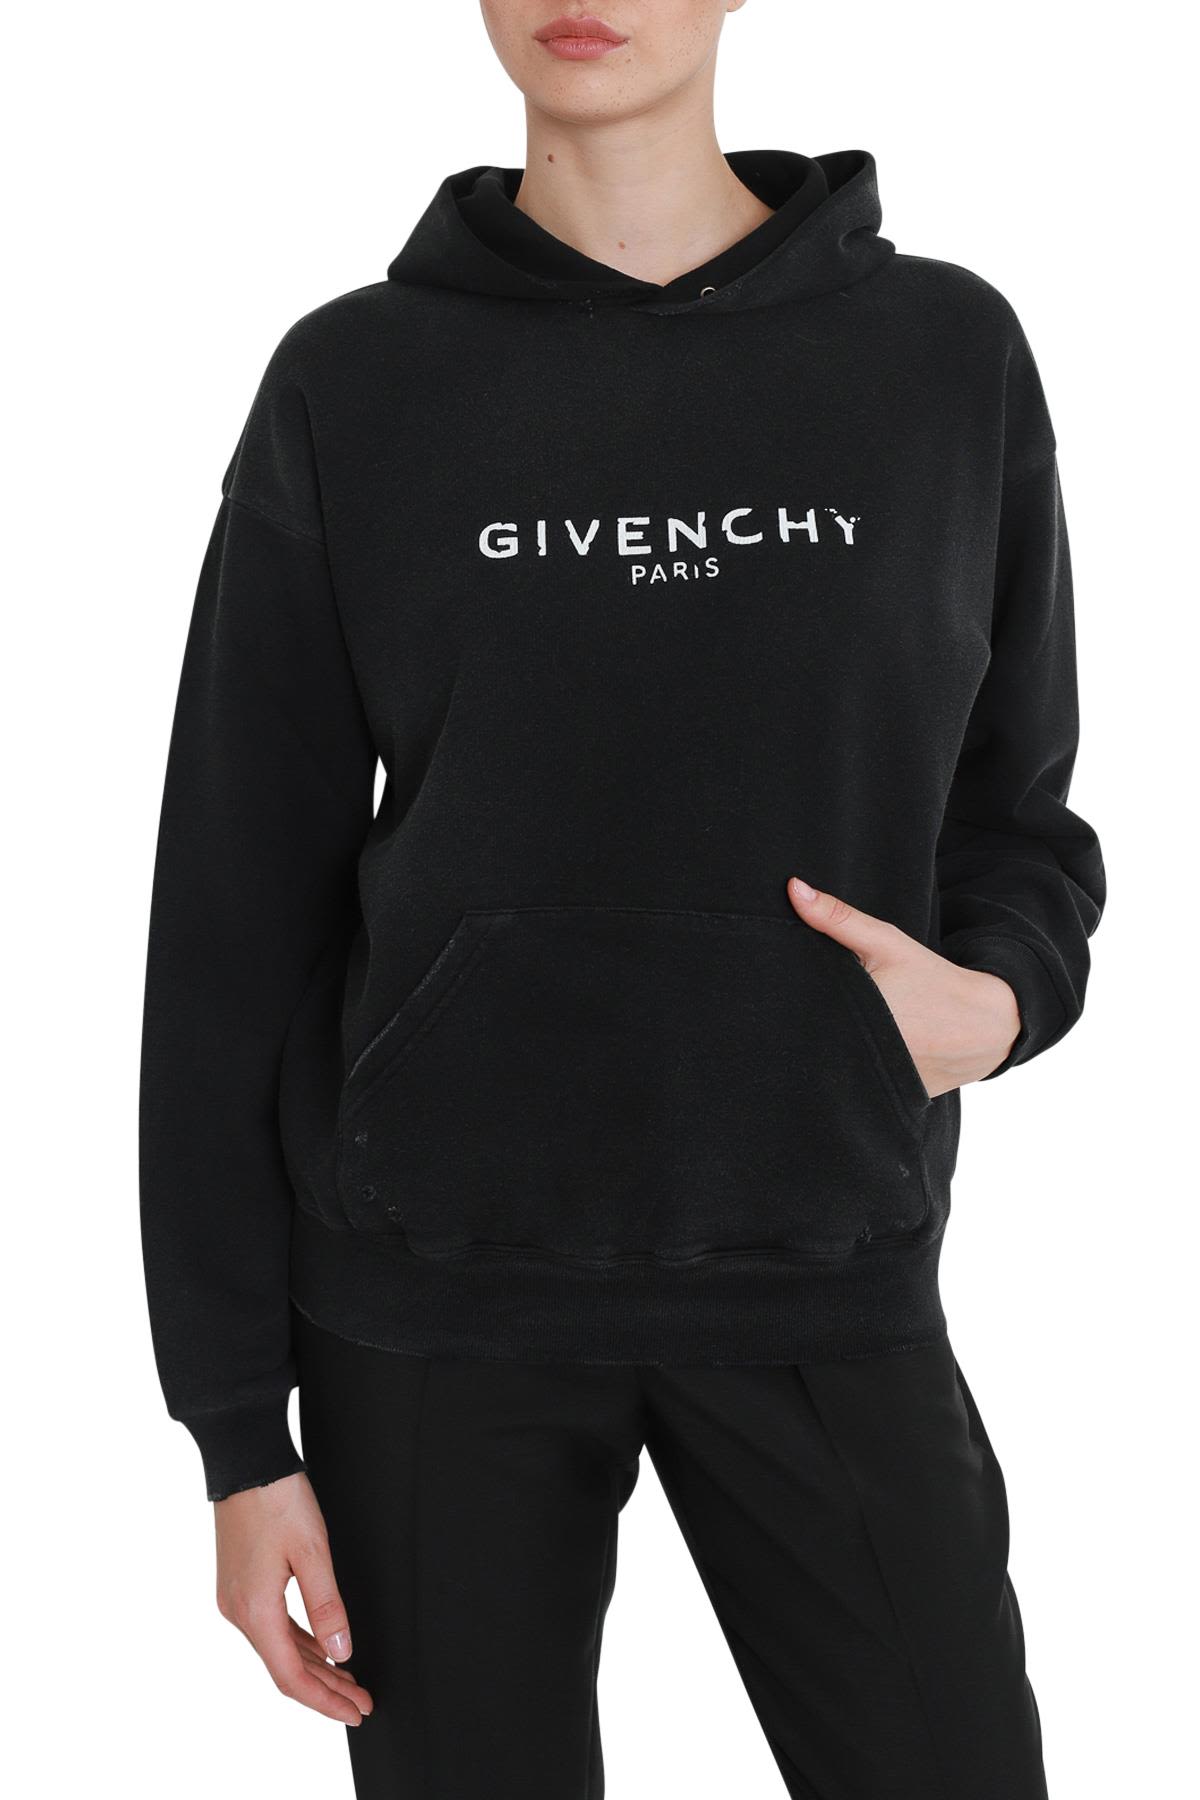 Givenchy Givenchy Paris Destroyed Hoodie - Nero - 10640368 | italist